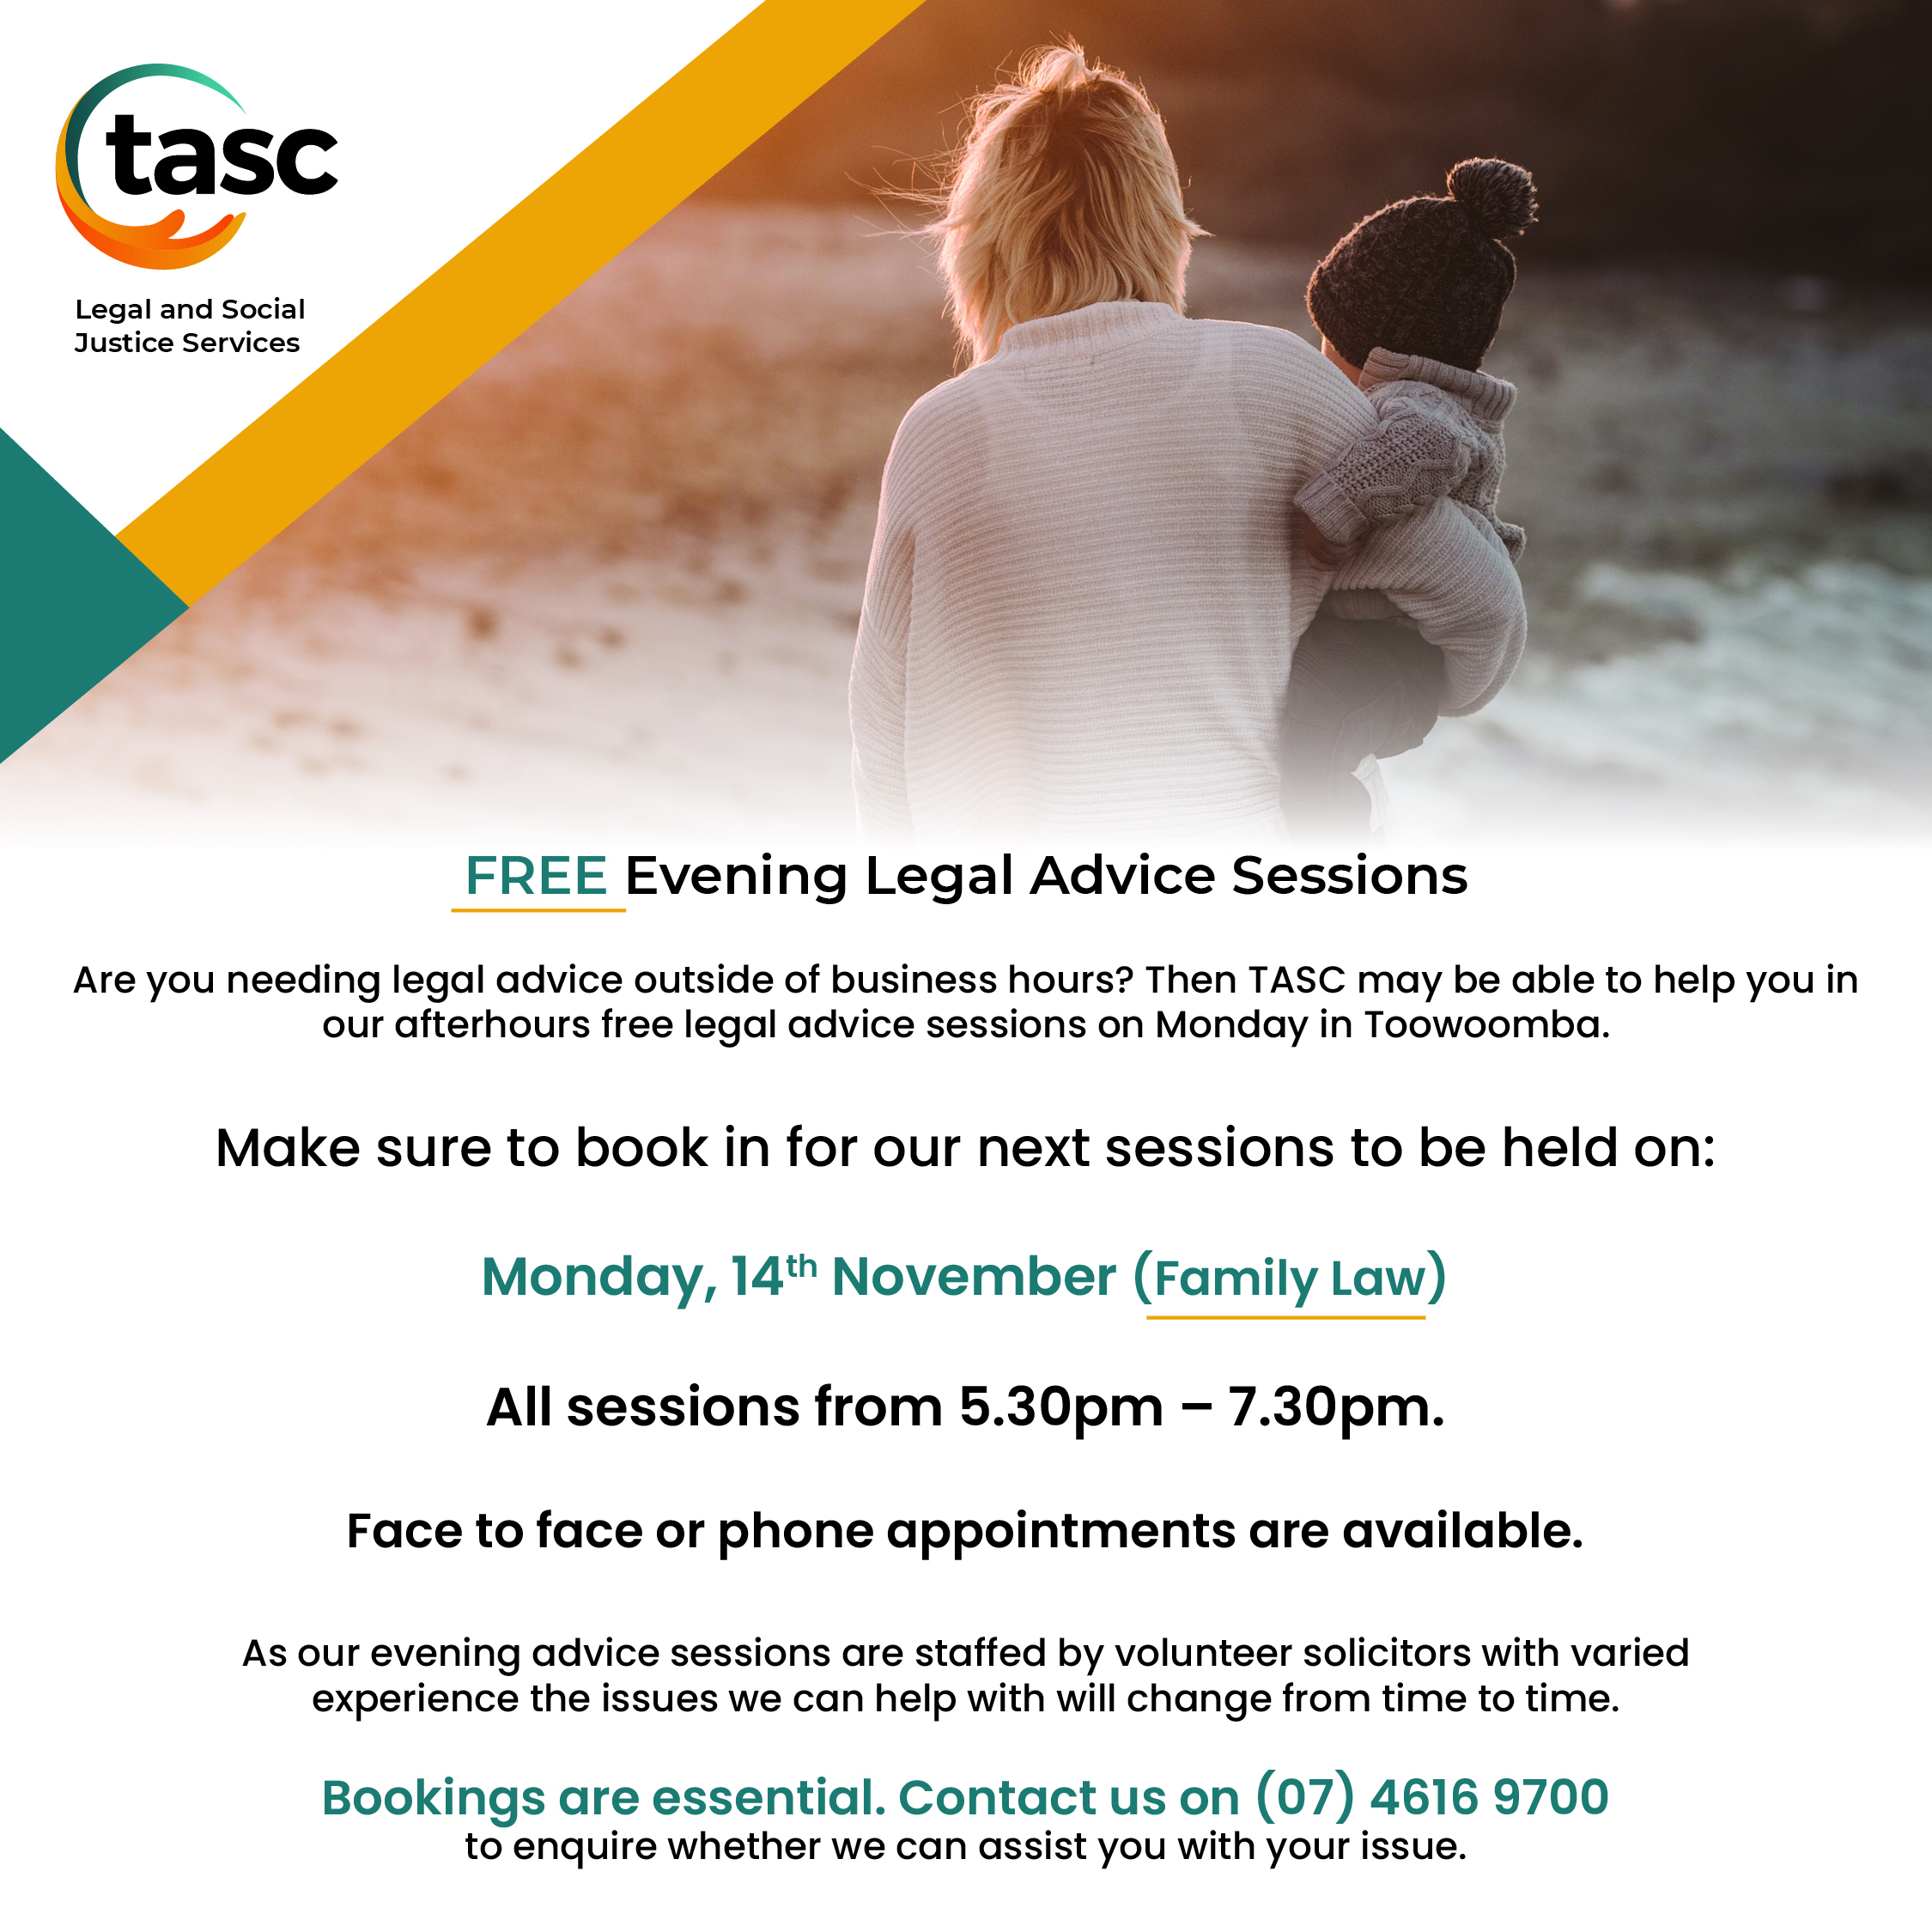 Free Evening Legal Advice Sessions (Family Law) Monday, 14 November 2022